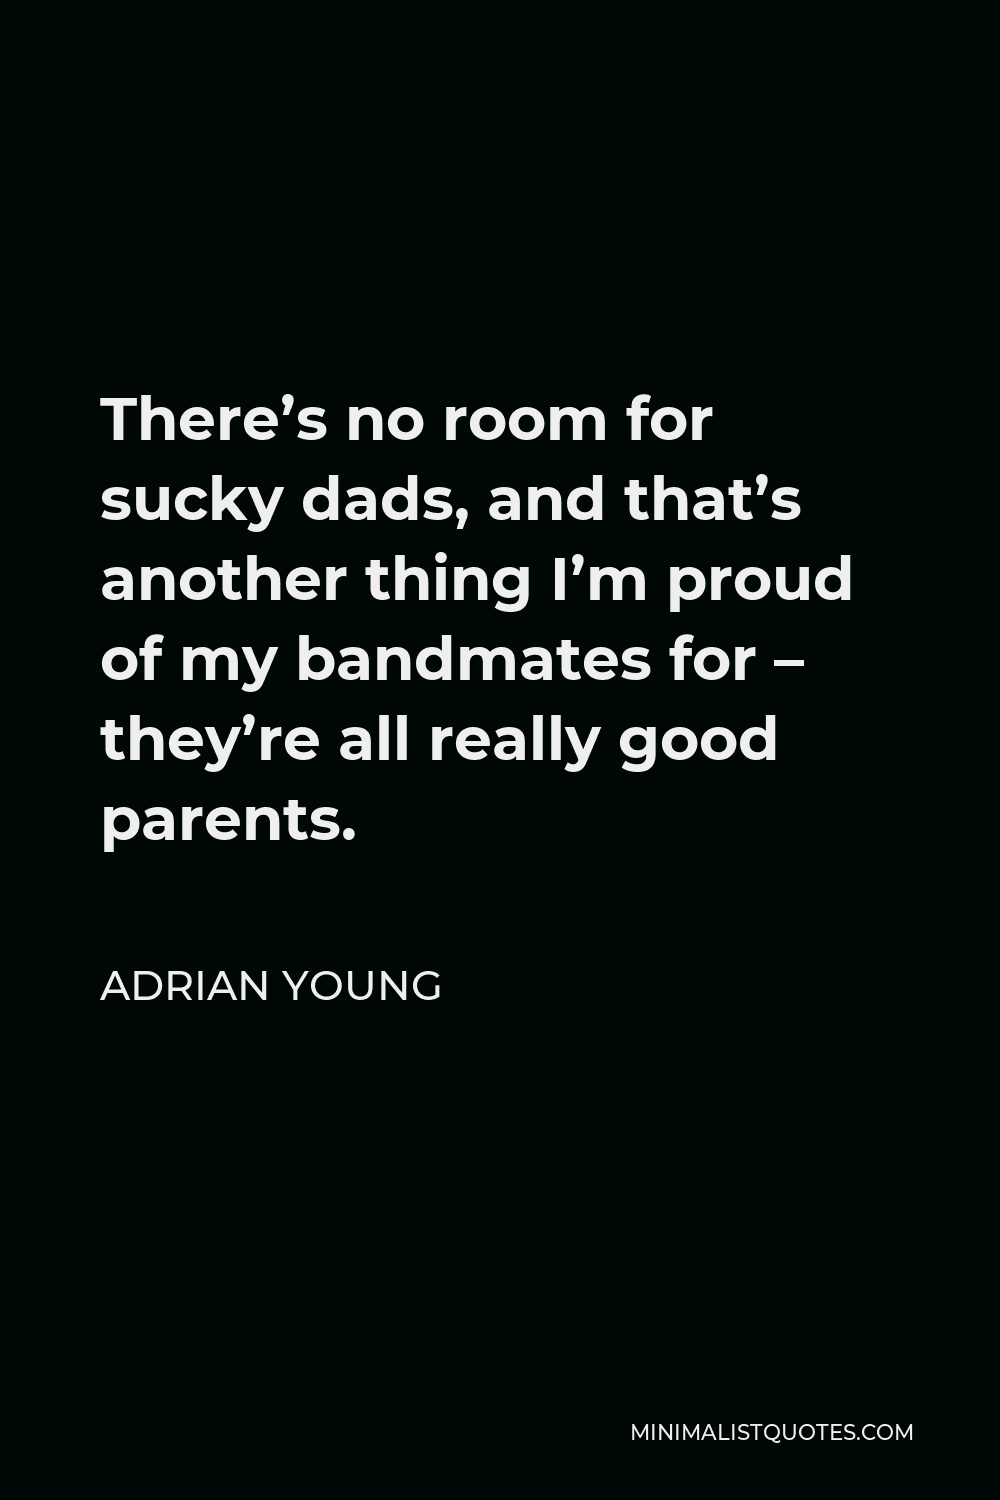 Adrian Young Quote - There’s no room for sucky dads, and that’s another thing I’m proud of my bandmates for – they’re all really good parents.